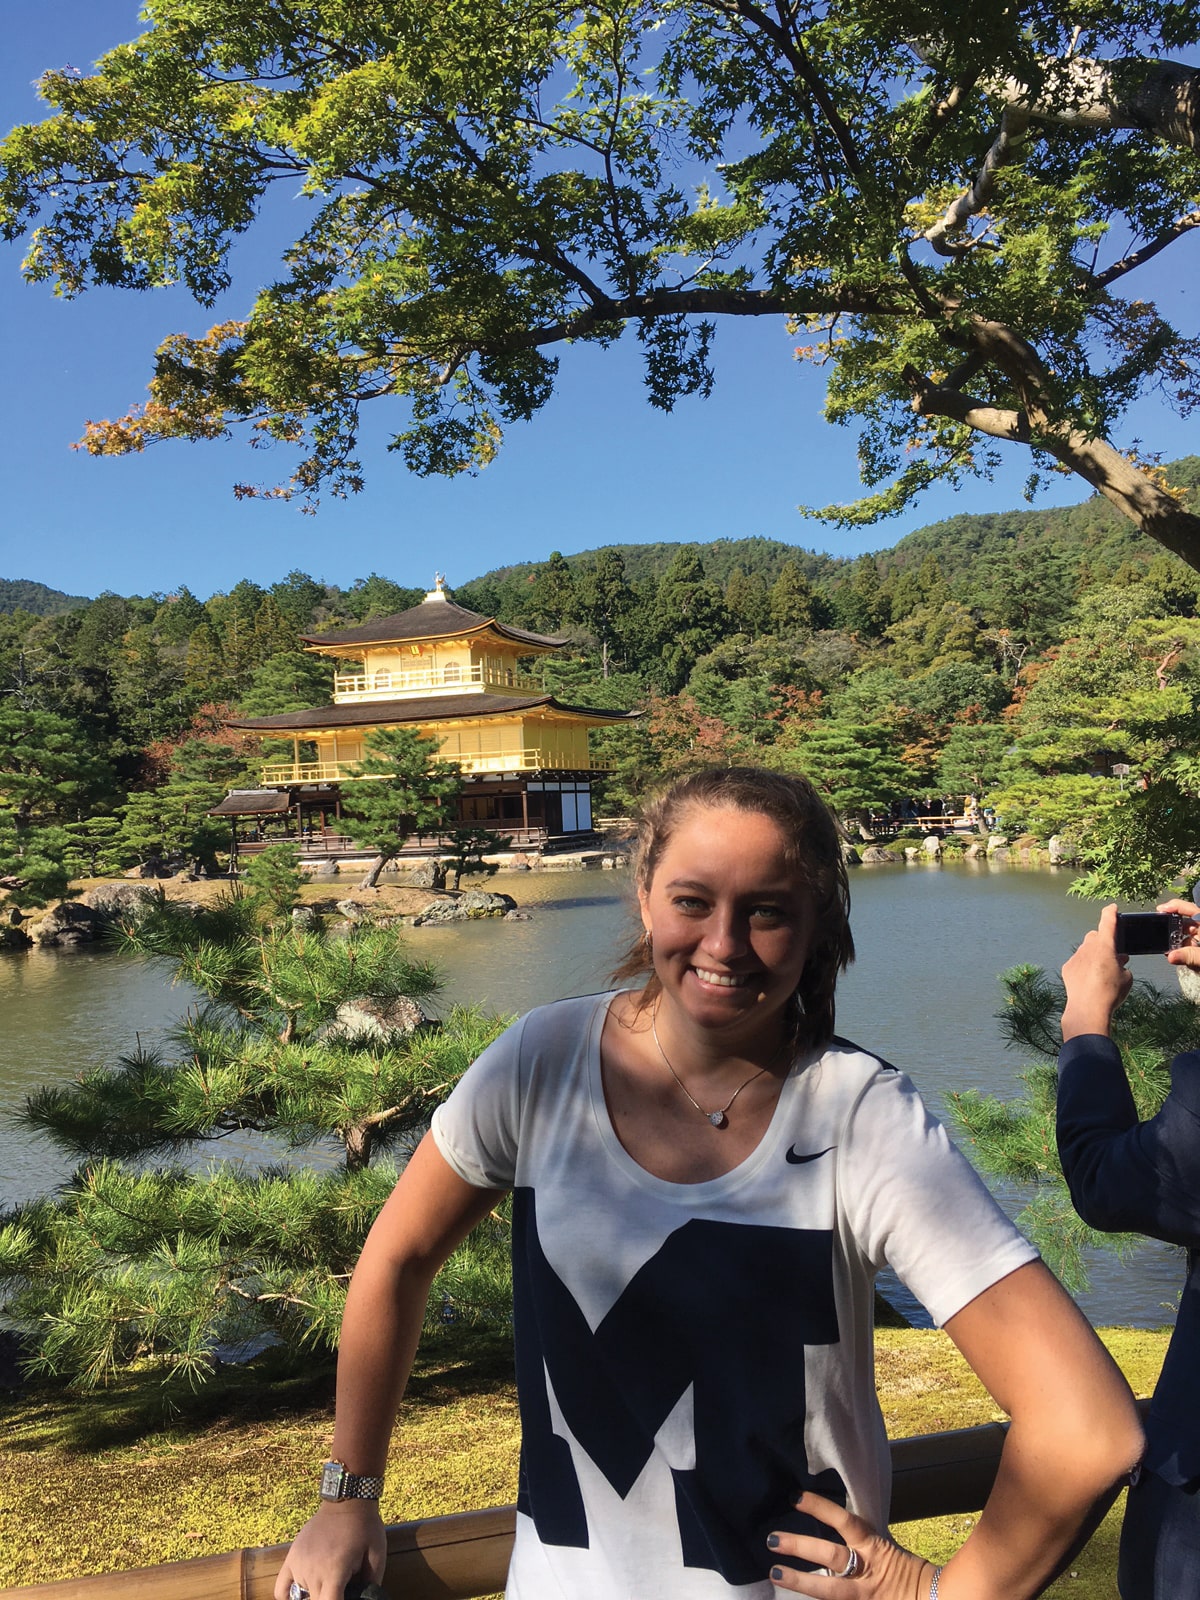 Lauren Caisman, ’10, took in the shimmering sight of Kinkaku-ji (the Golden Pavilion) during a trip to Kyoto, Japan.